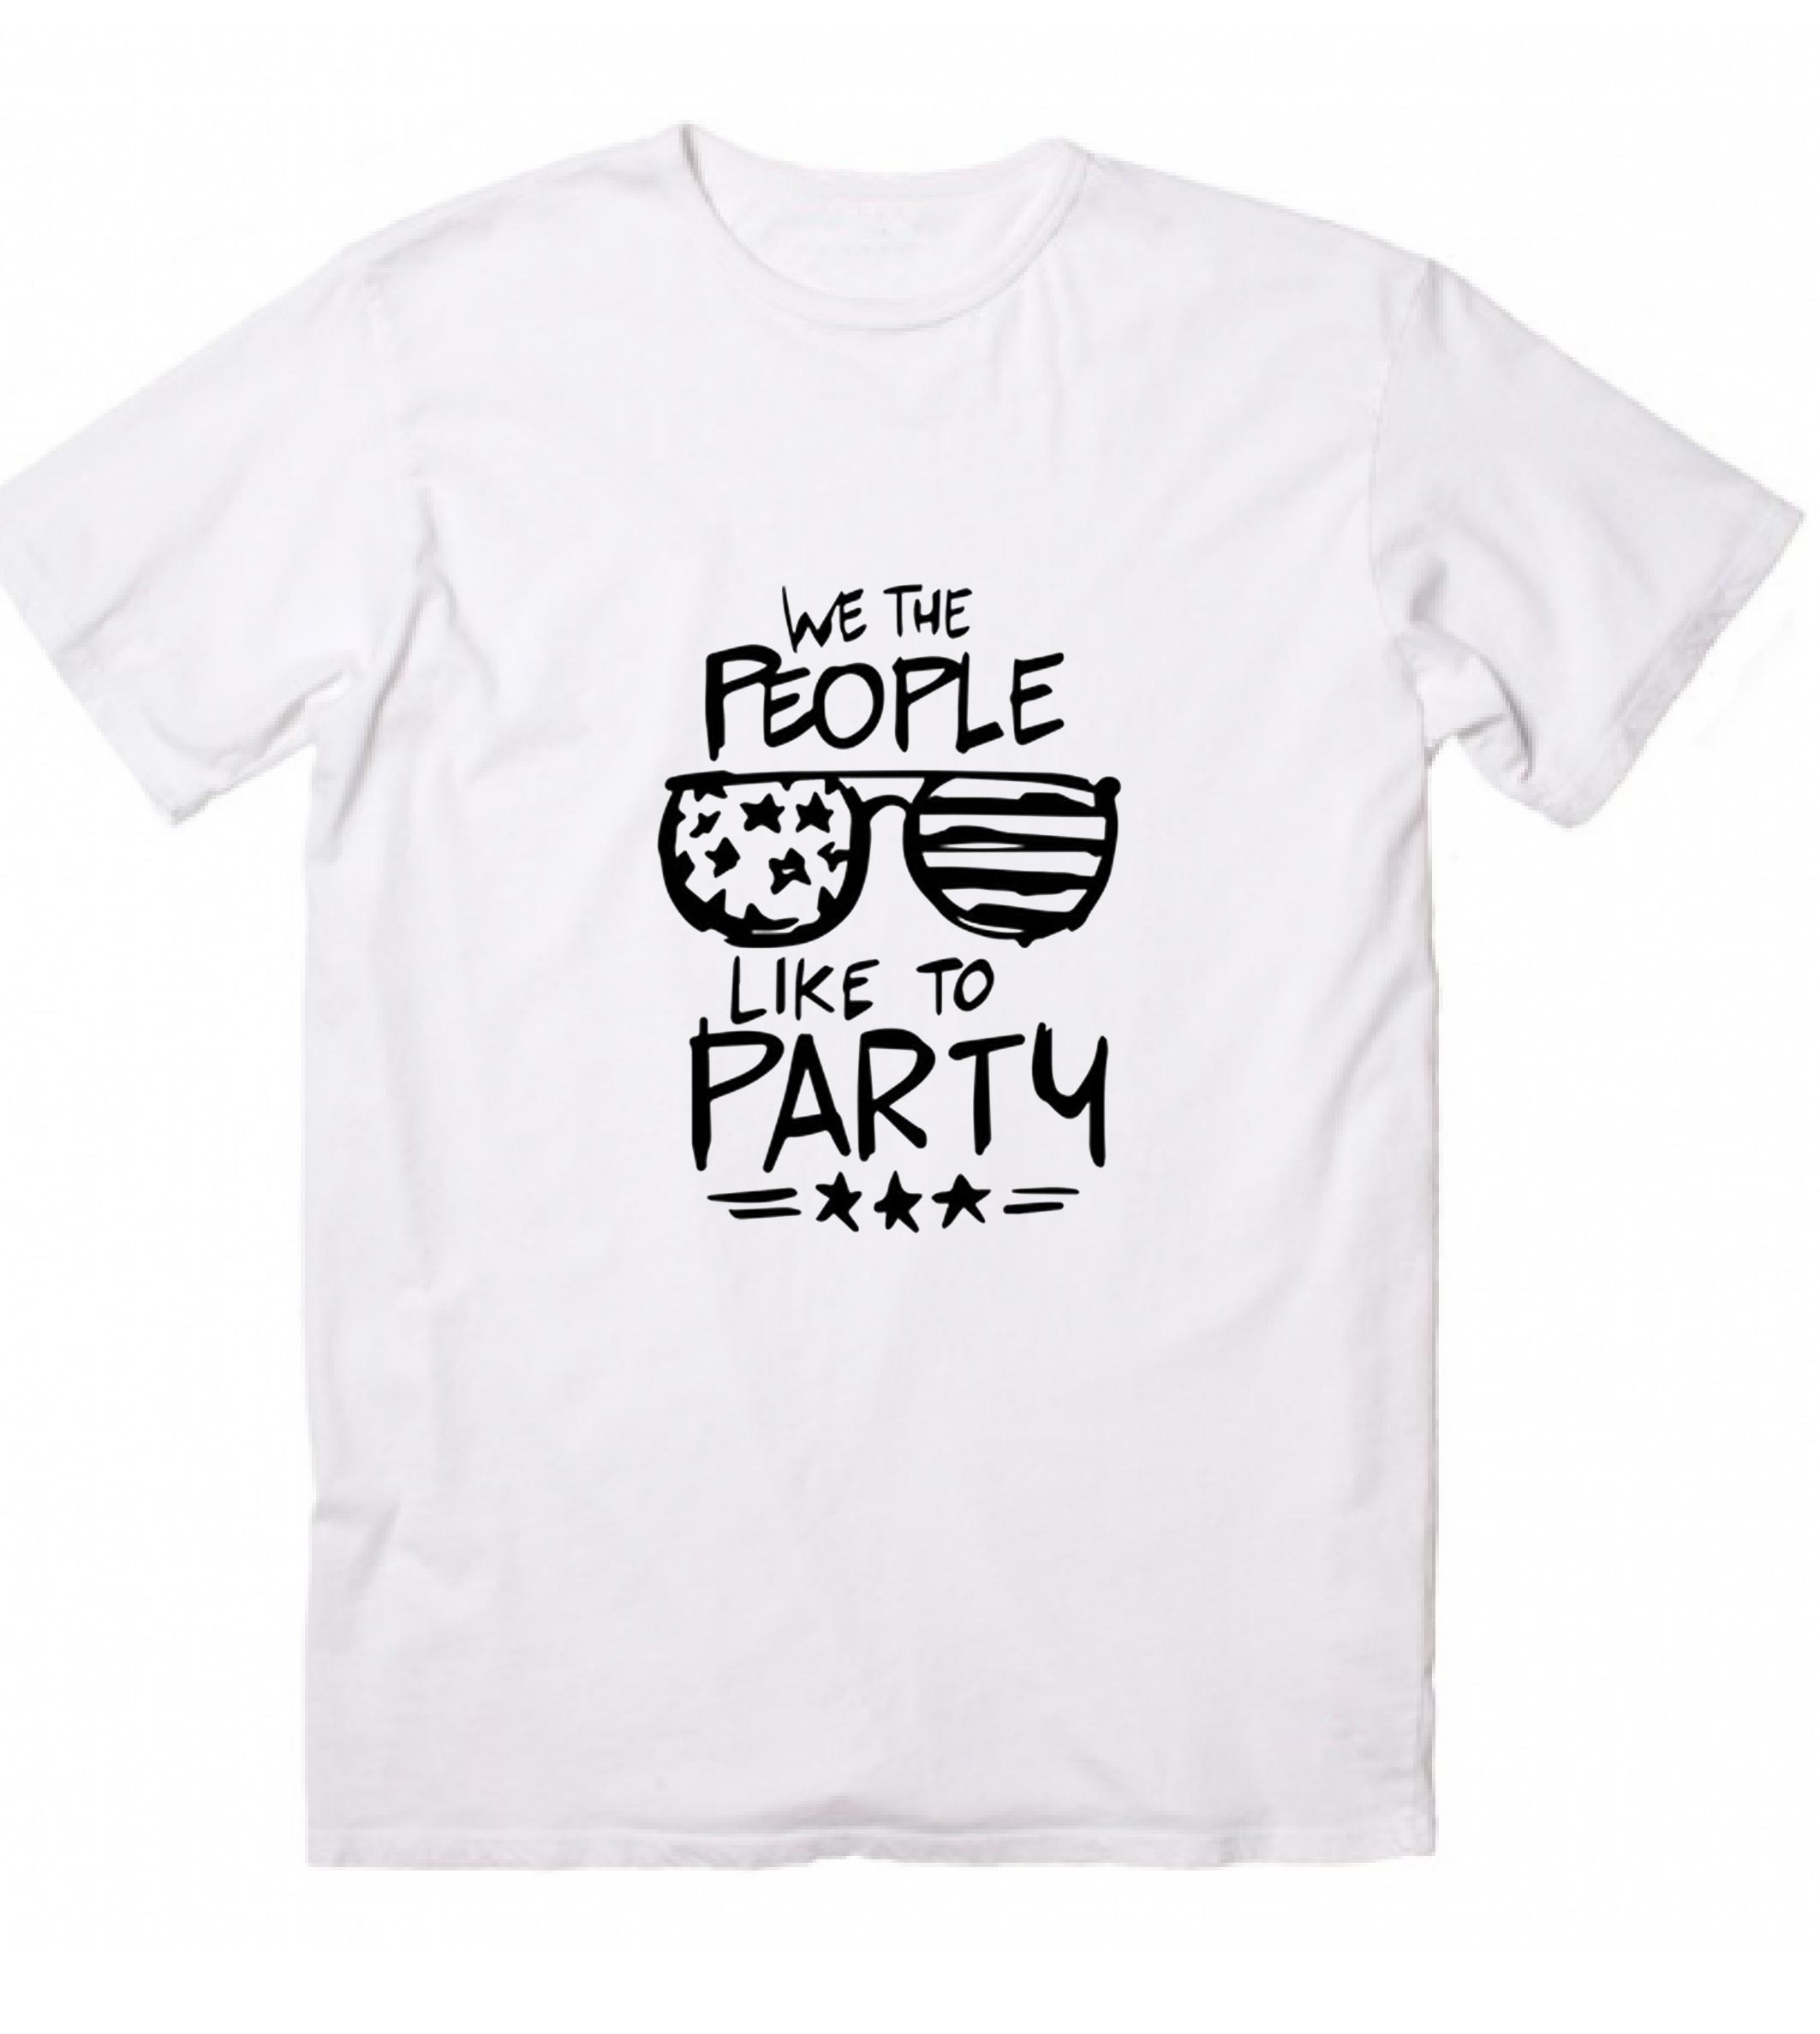 We The People Like To Party Funny Graphic Tees - t shirt store near me,  Clothfusion Tees,